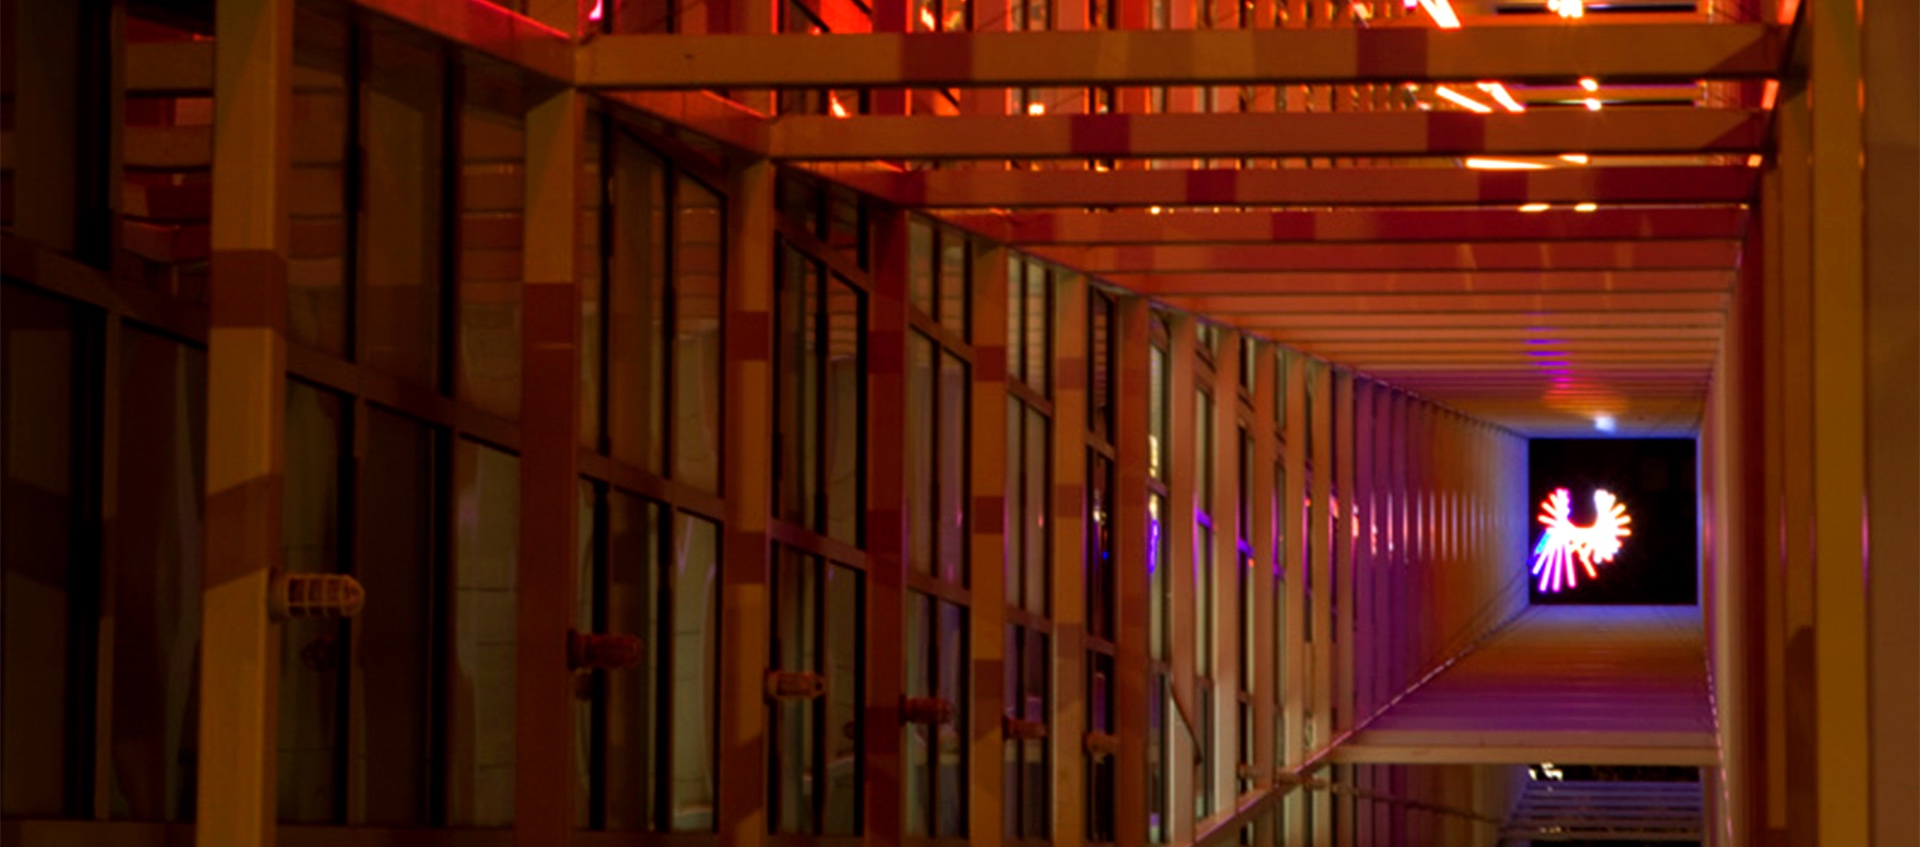 Image of a colorful light installation by artist Erwin Redl in the exterior grid at the Wexner Center for the Arts